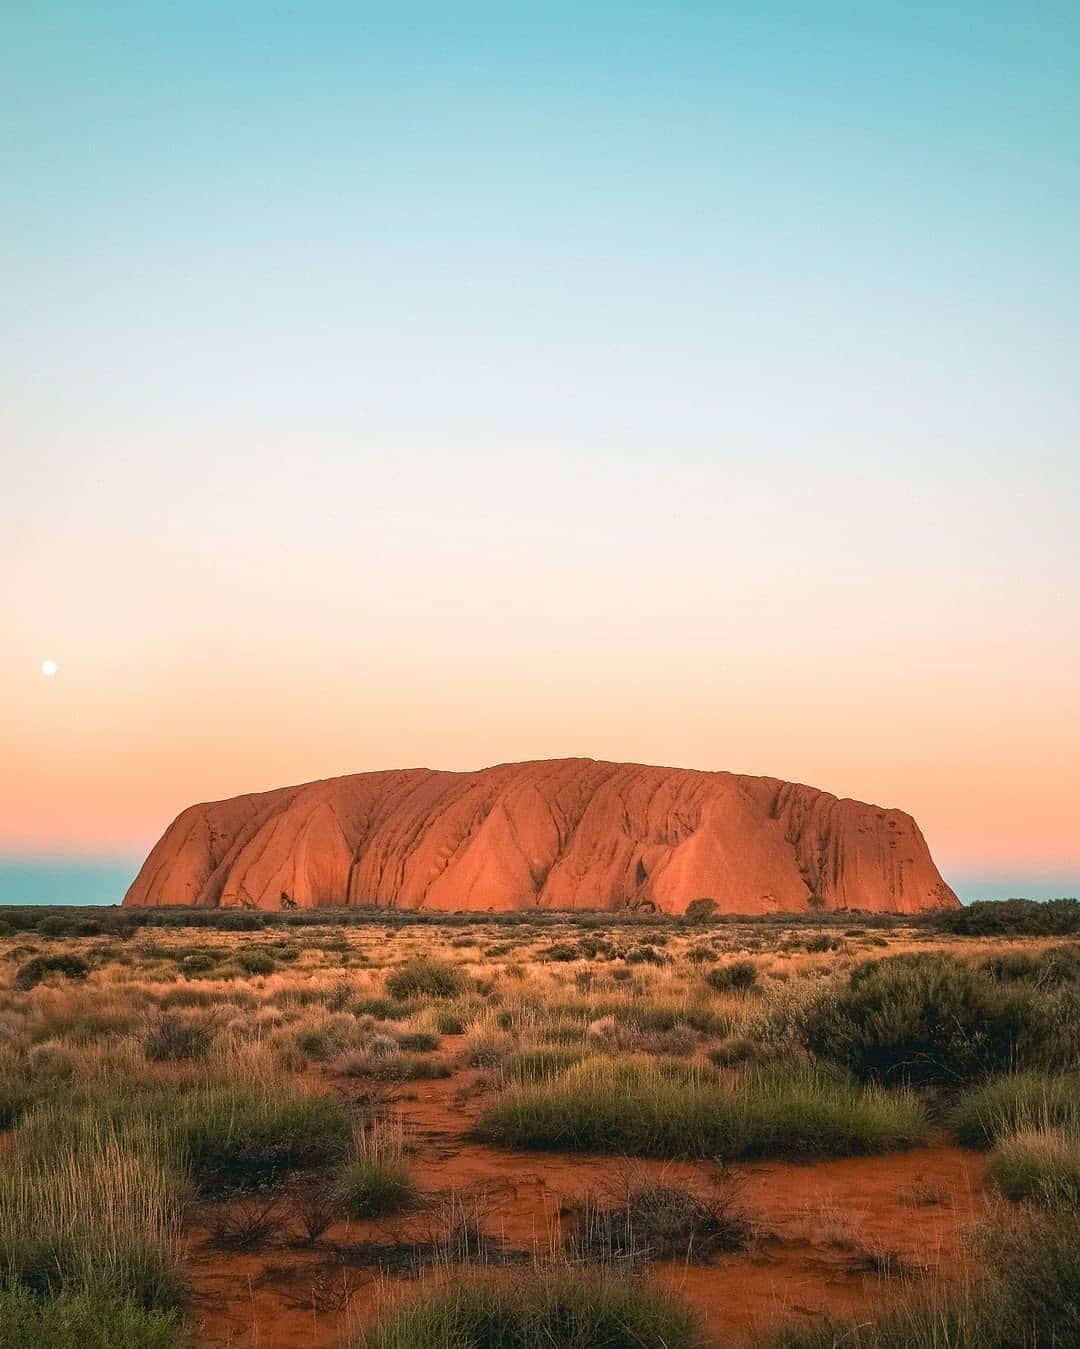 Reposted from @exploreuluru -  If the simple fact of looking at this image is soothing, wait until you’re actually standing in front of it! Goosebumps guaranteed.
📷 @incognito.travels
#exploreuluru #uluru #australia #seeaustralia
#travel